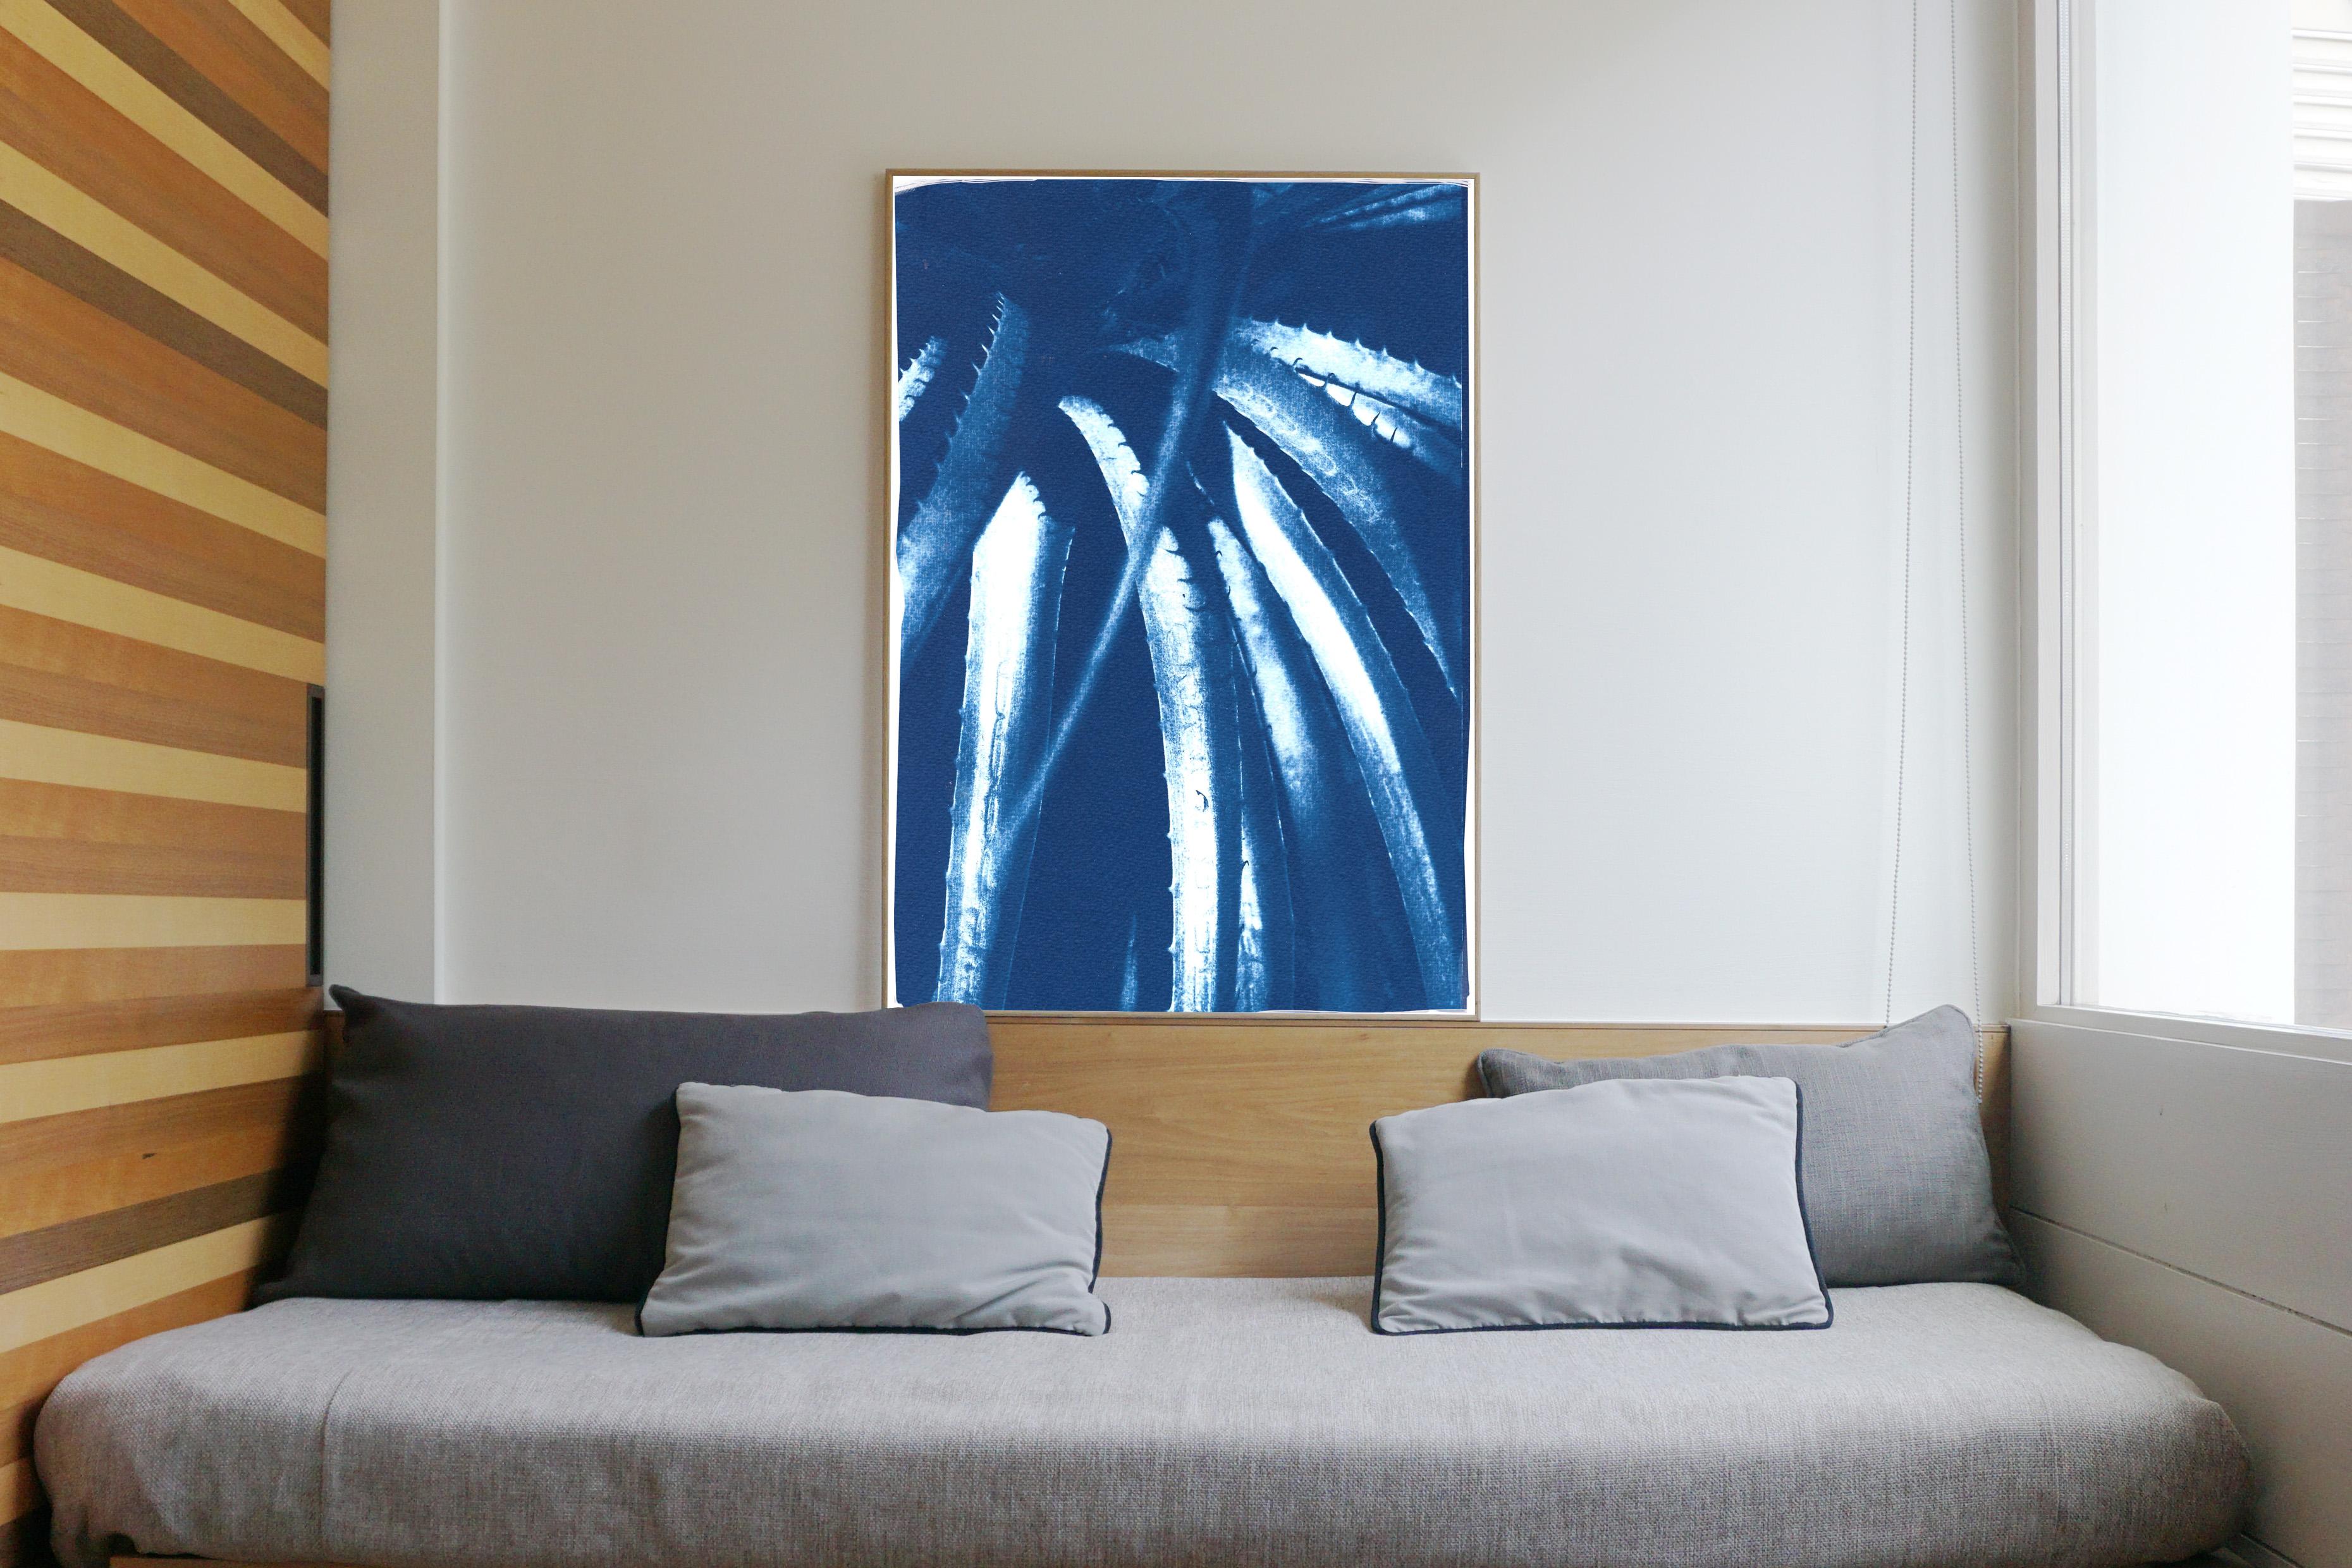 Jurassic Aloe Leaves, Botanical Cyanotype on Paper, Blue Plants, Nature Details - Print by Kind of Cyan